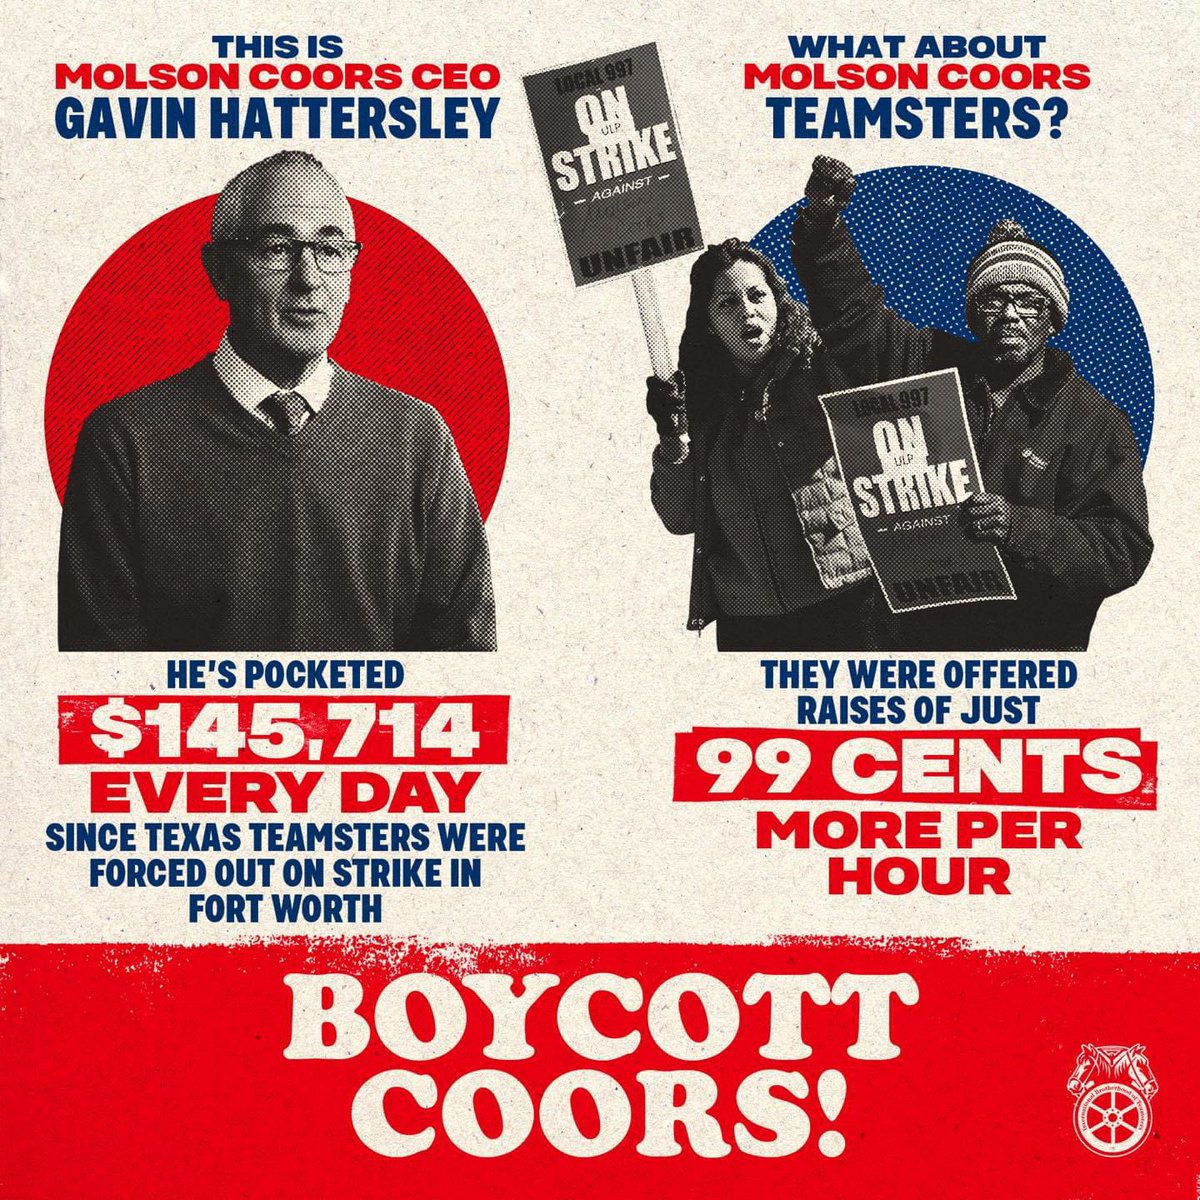 EVERY CAN COUNTS! DON’T DRINK MOLSON COORS! Texas Teamsters have been on strike against Molson Coors in Fort Worth for 38 days. Just so you know where the beverage giant’s priorities are… Molson Coors’ CEO has taken home more than $5 million since his company forced workers onto…